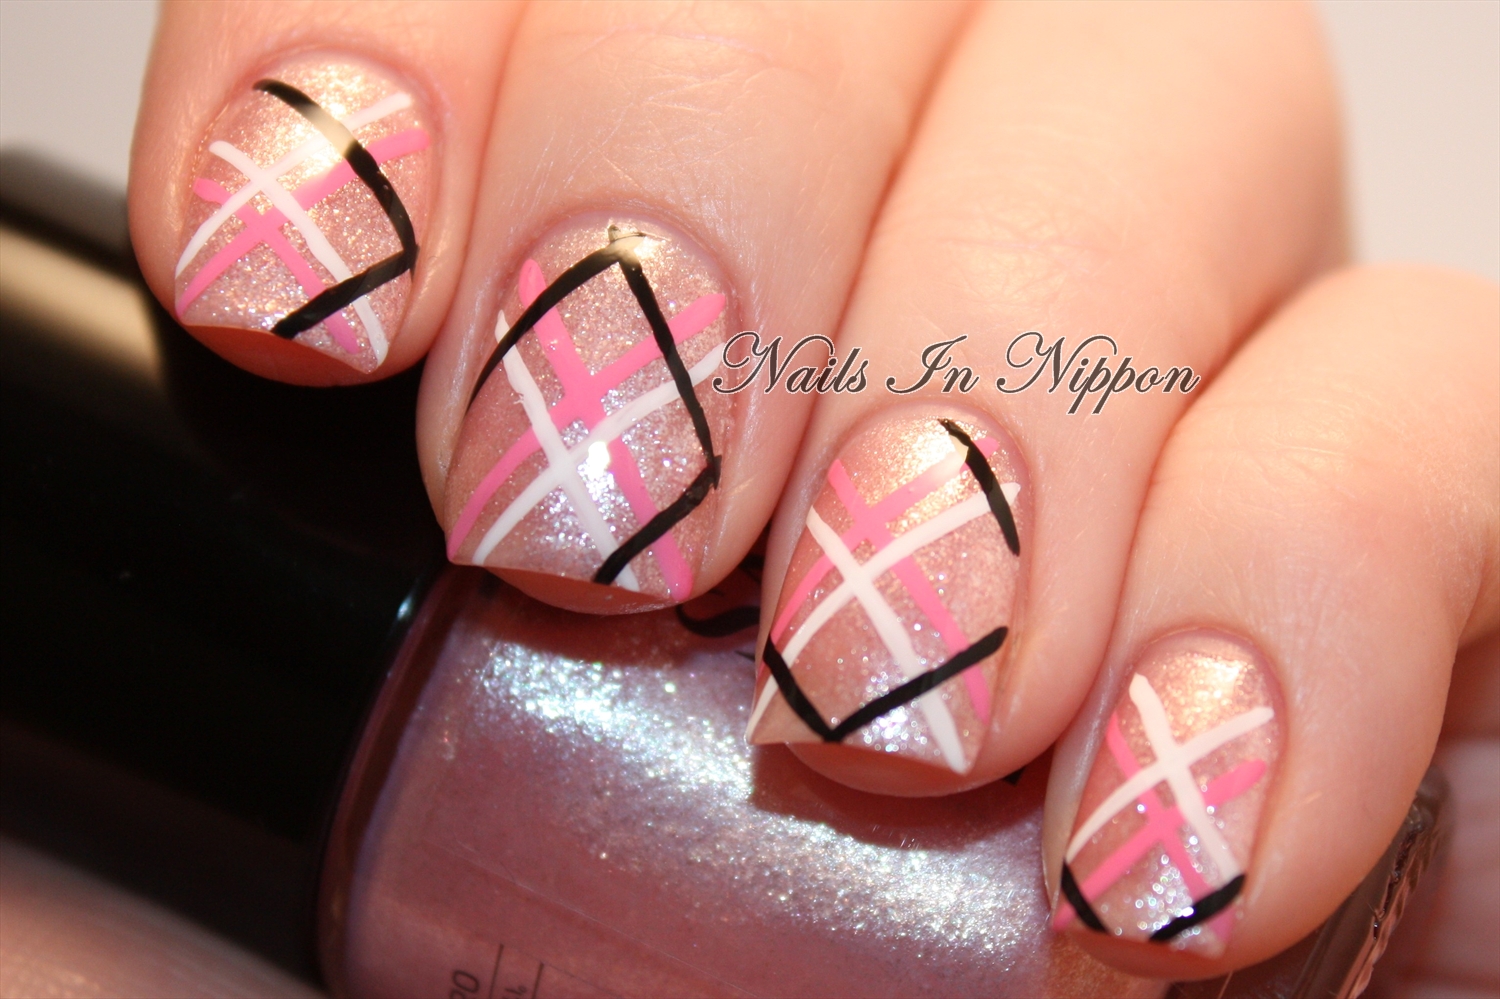 2. Easy Pink Tip Nail Art - wide 9